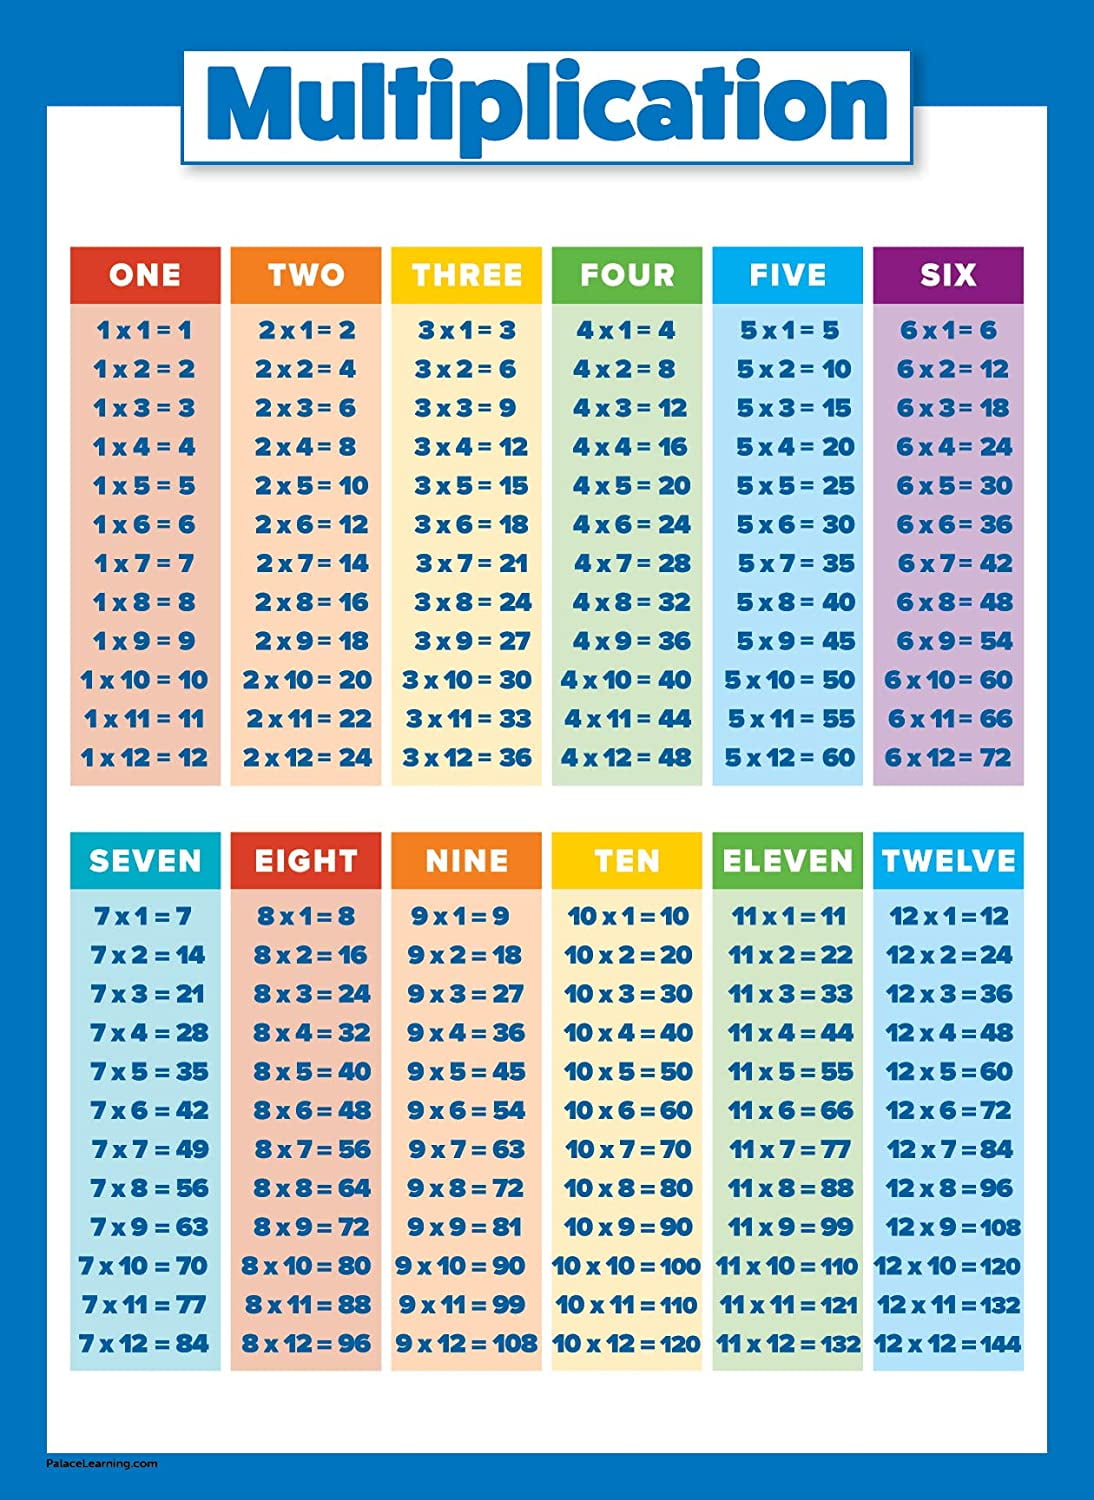 Multiplication Table Poster for Kids Educational Times Table Chart